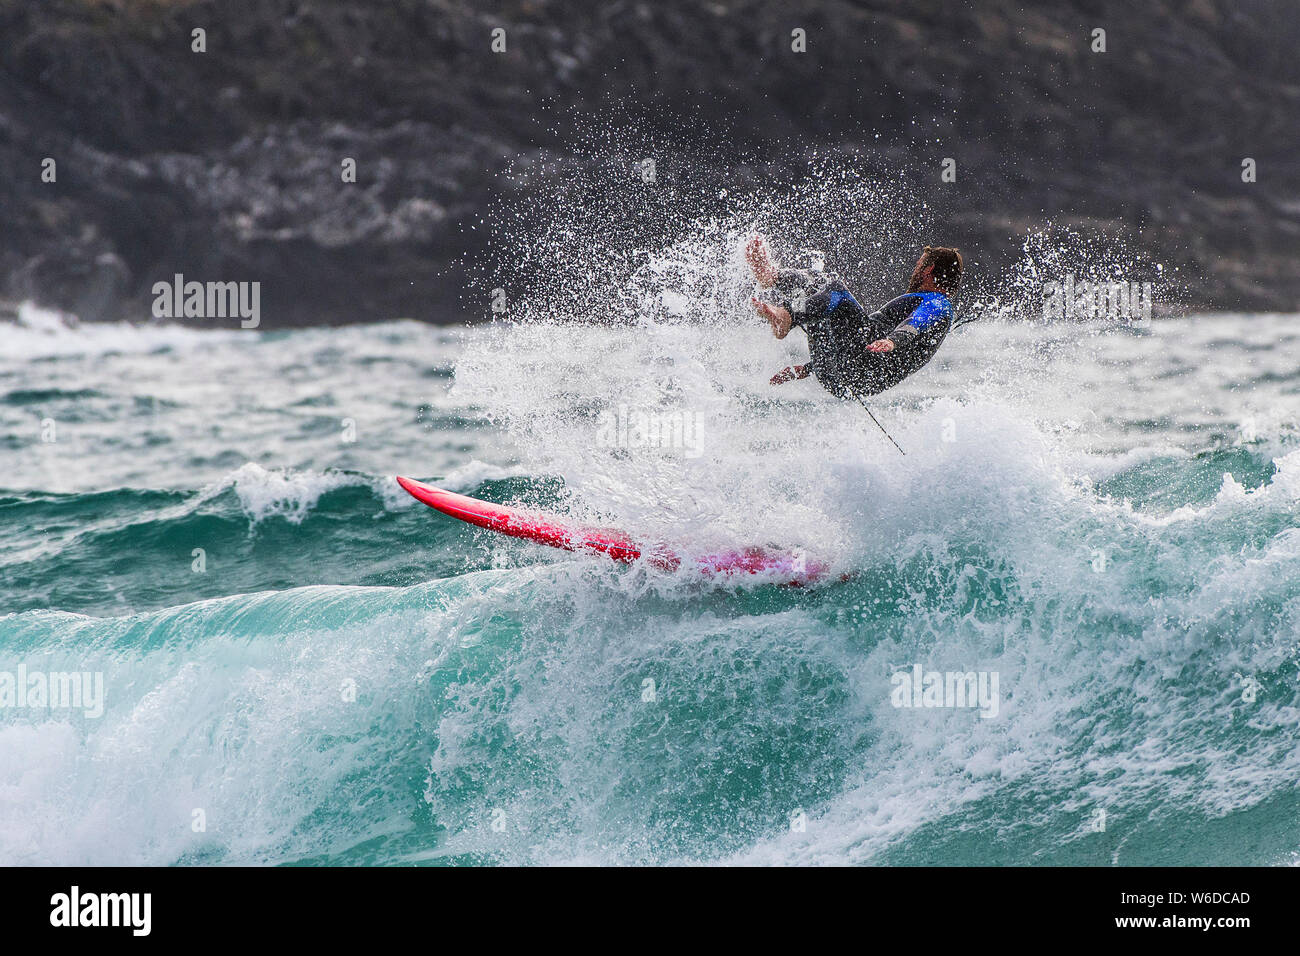 A surfer wipe wiping out at Fistral in Newquay in Cornwall. Stock Photo